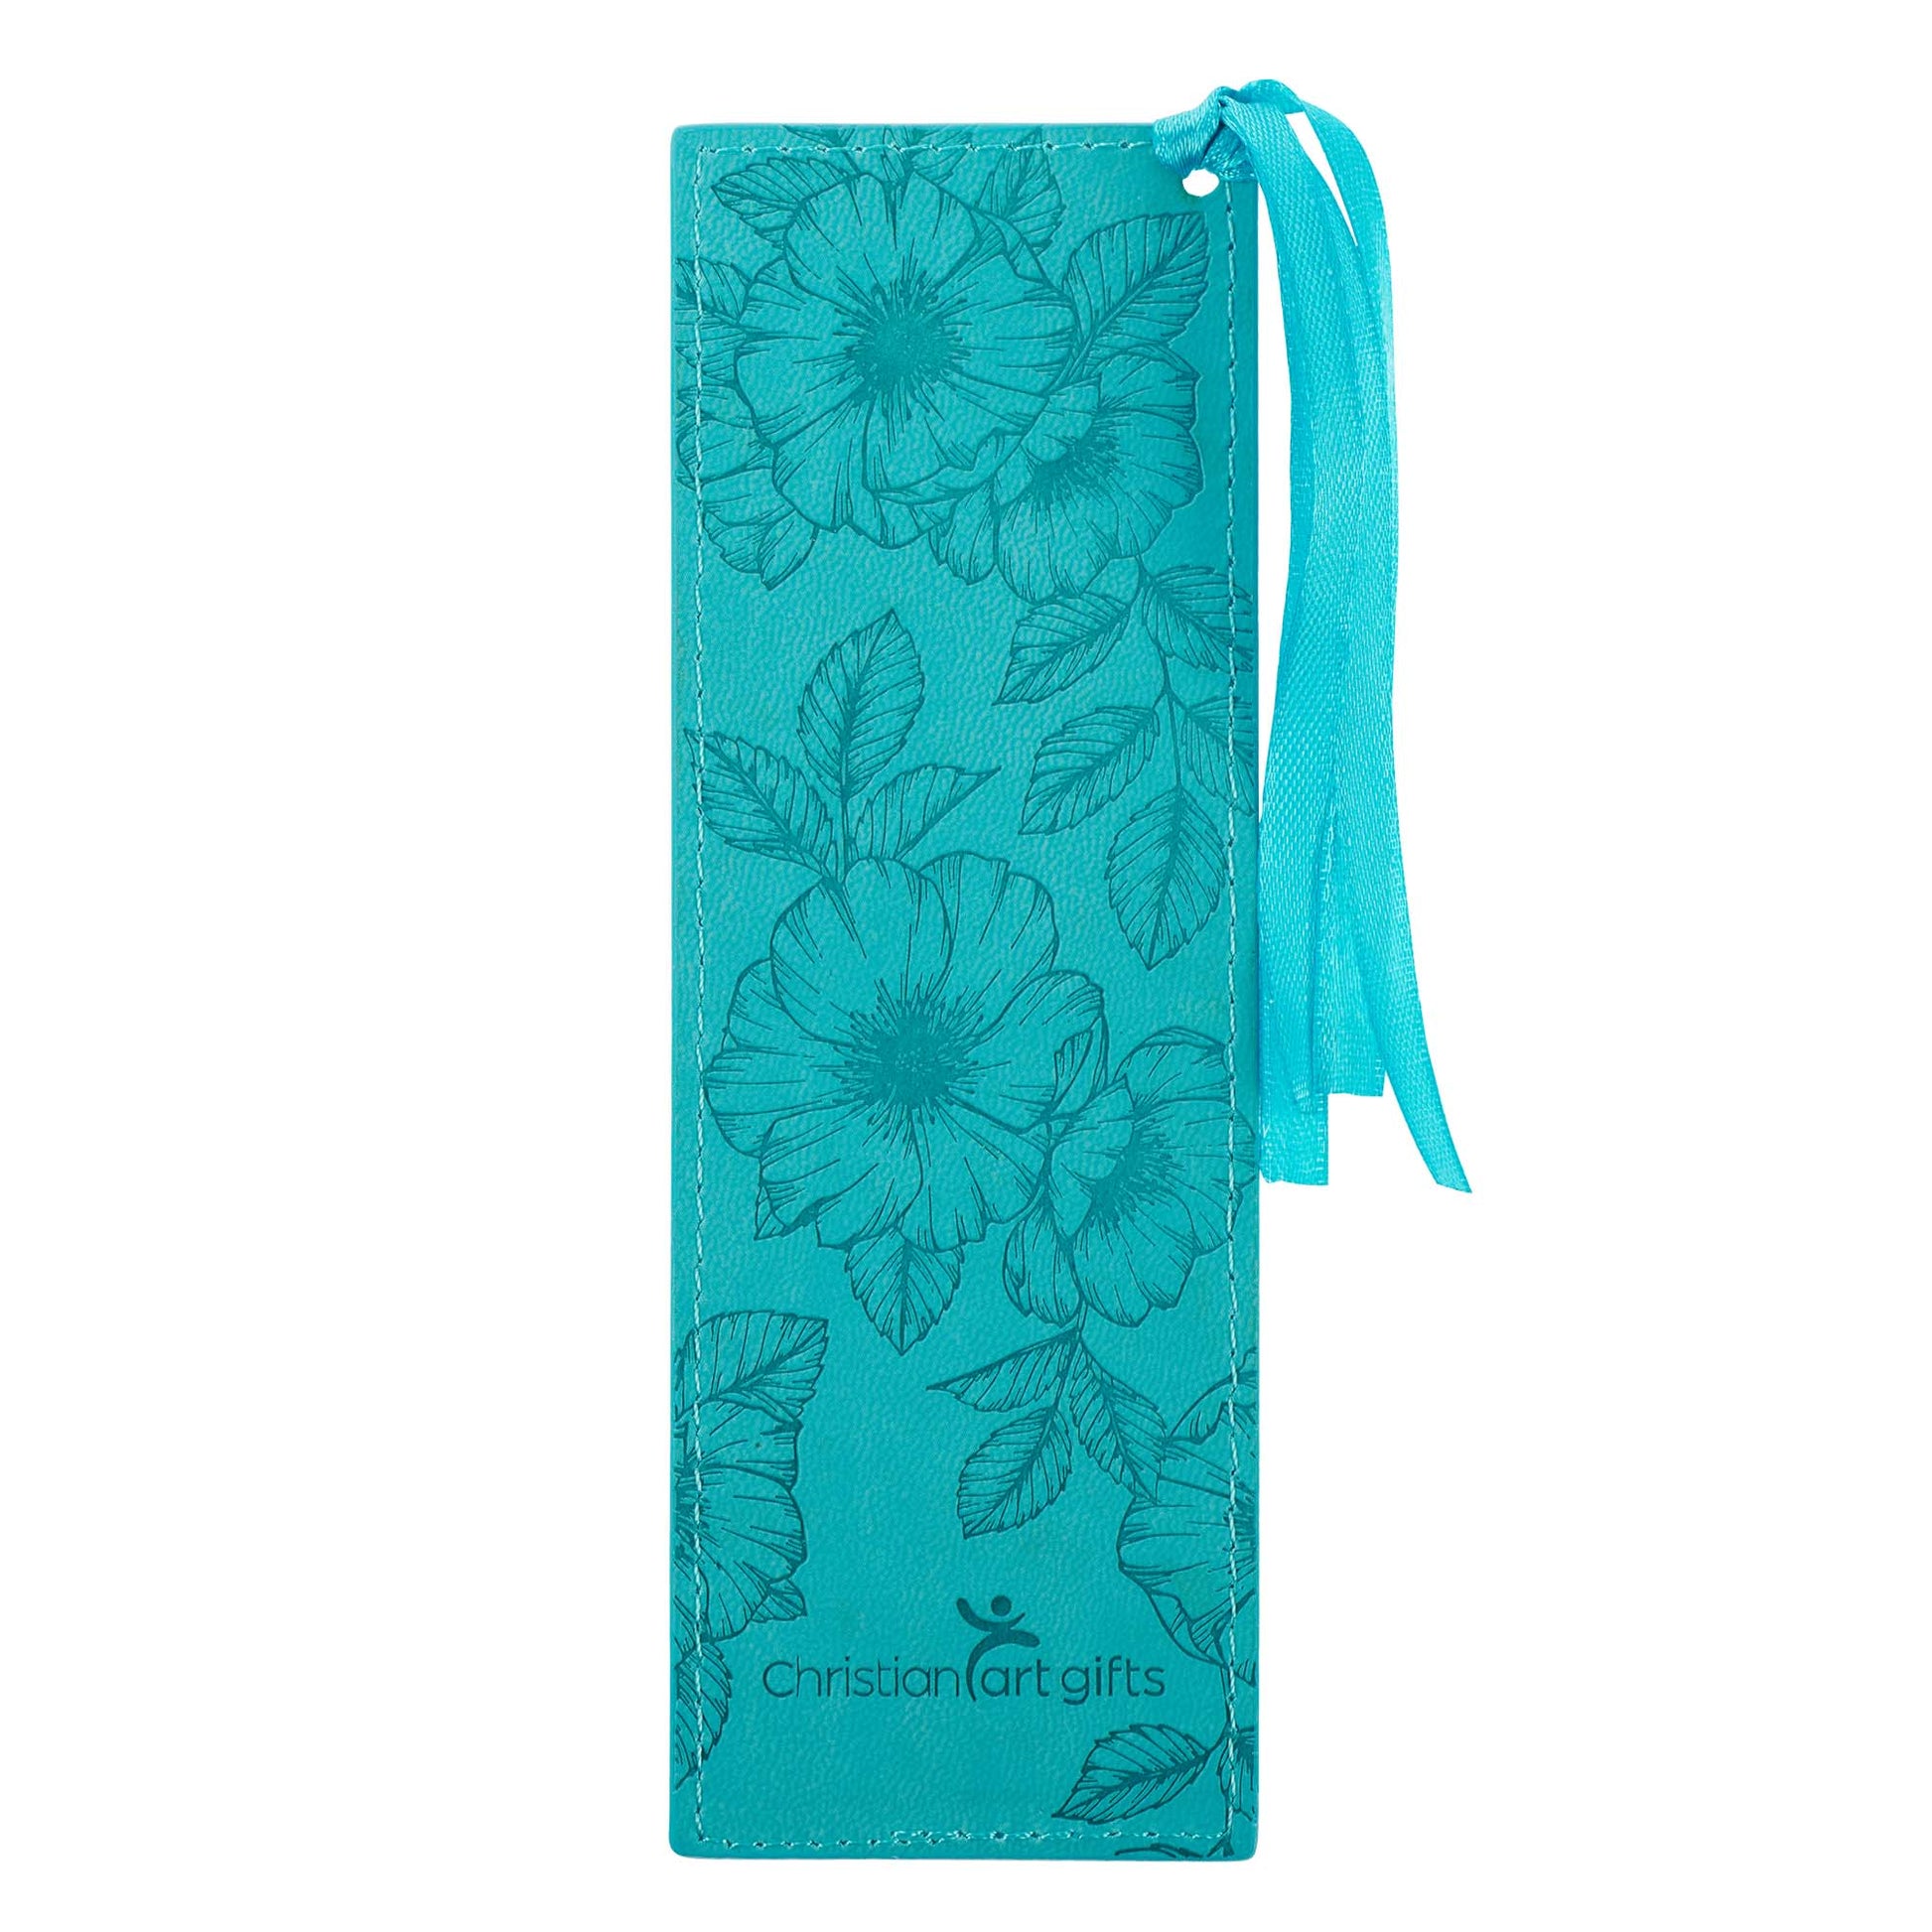 Strength & Dignity Teal Faux Leather Bookmark - Proverbs 31:25 - The Christian Gift Company